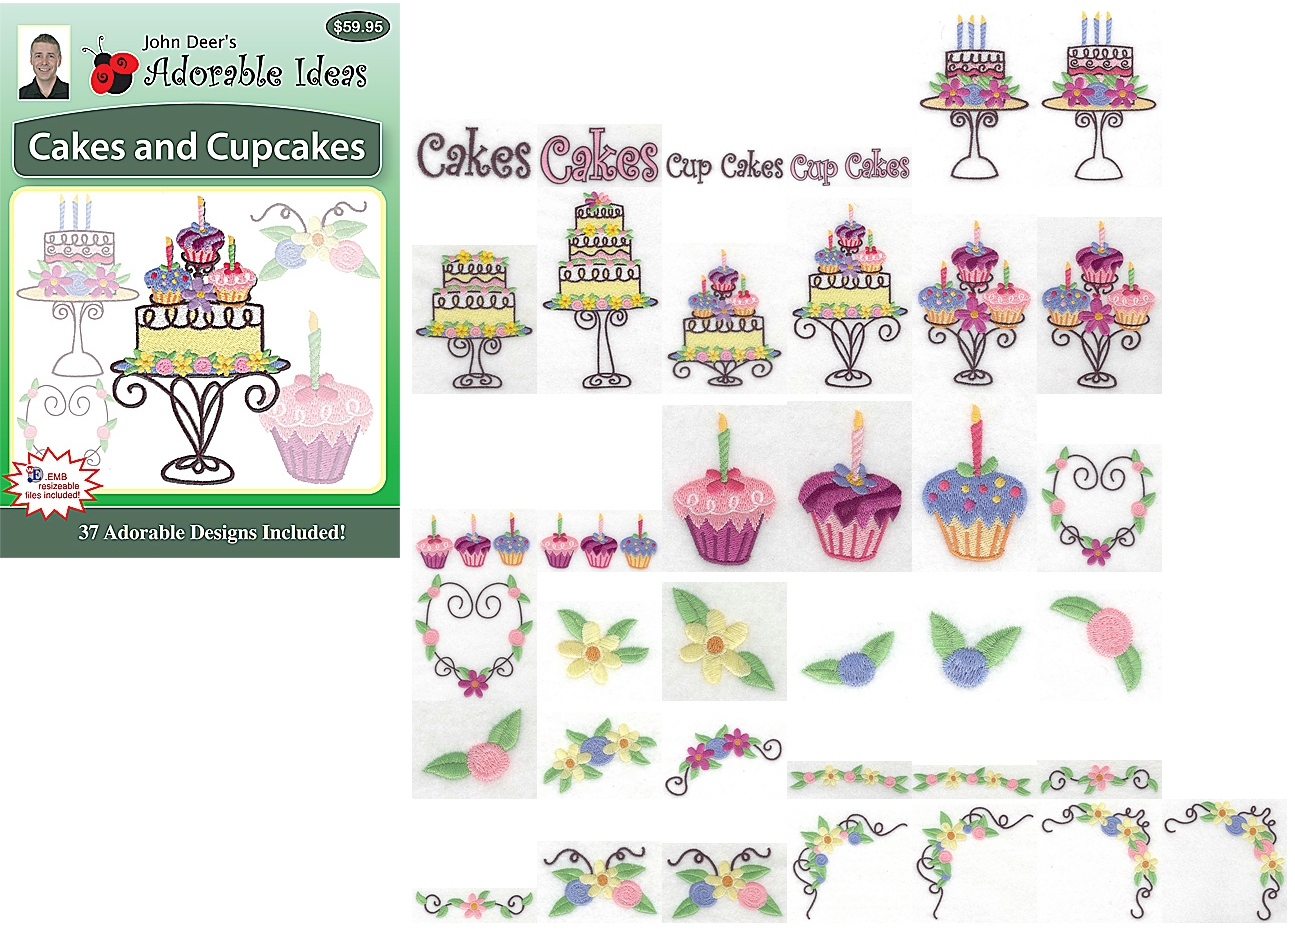 Cakes & Cupcakes Embroidery Designs by John Deer's Adorable Ideas on a Multi-Format CD-ROM AICAC